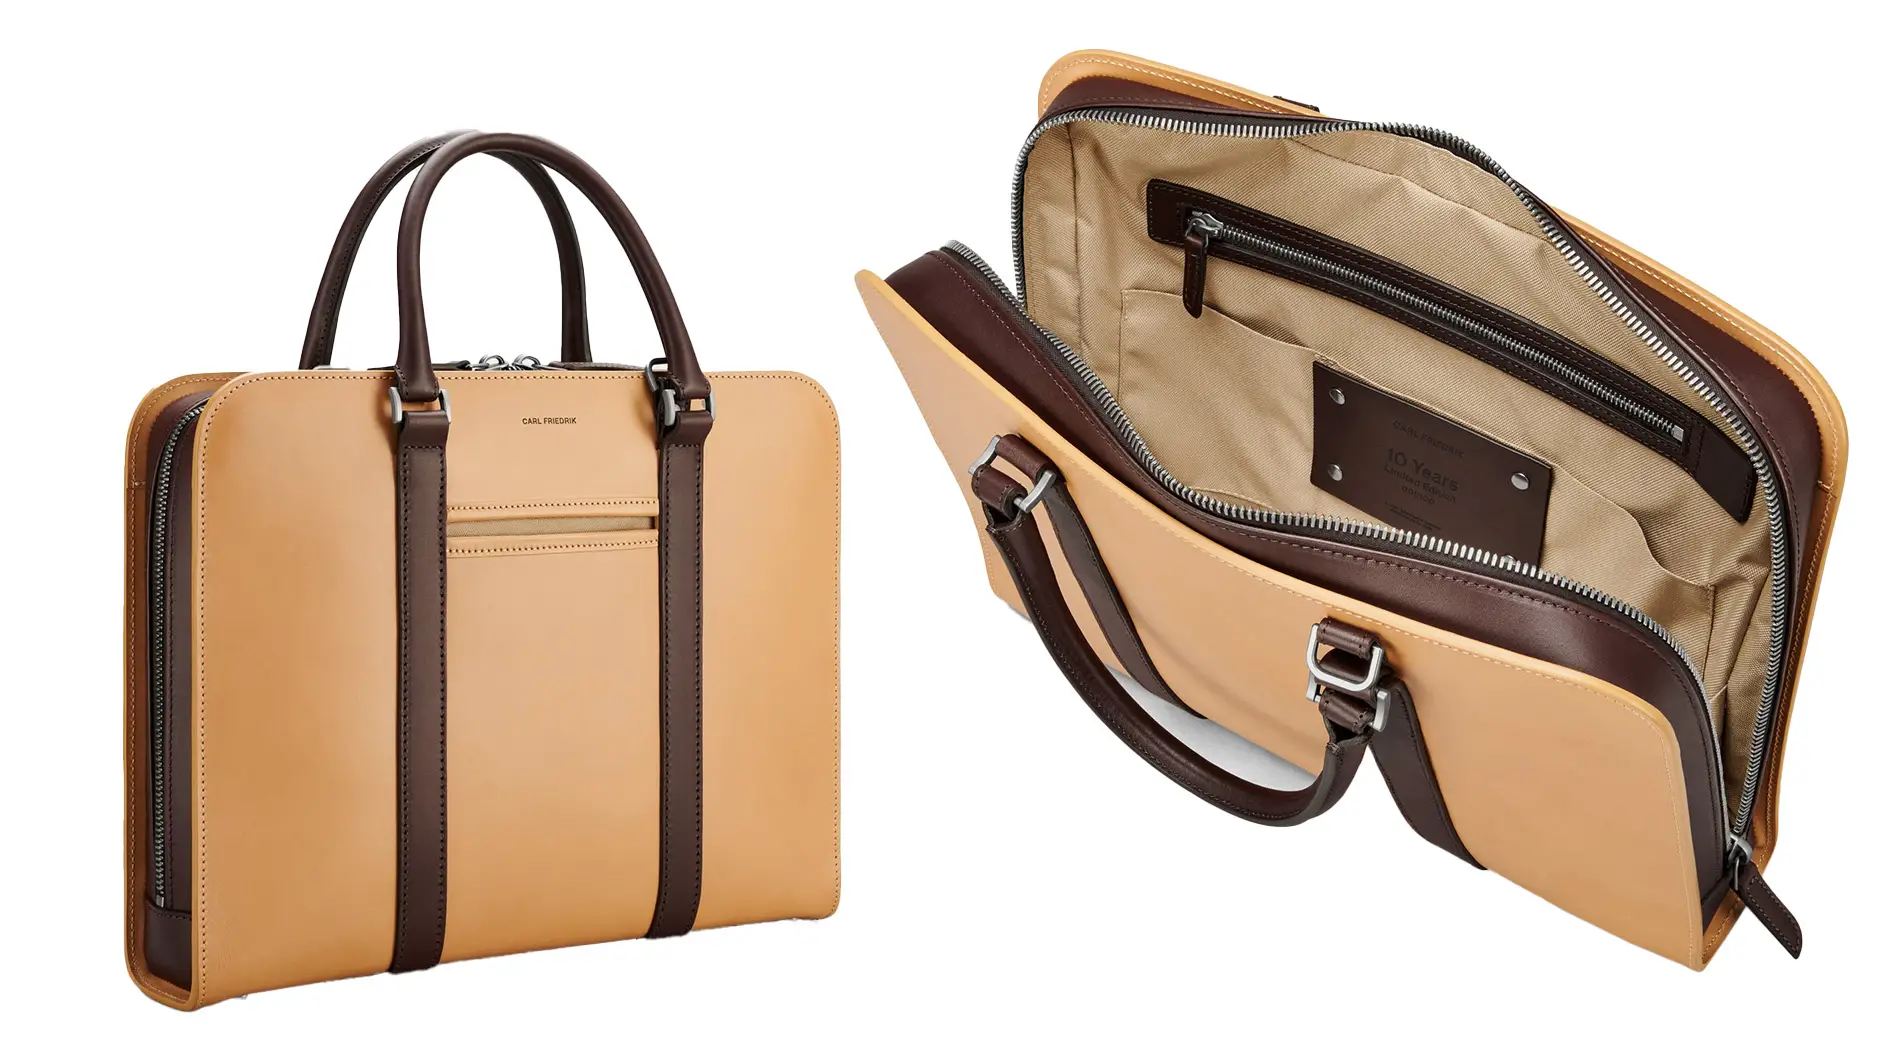 MacBook briefcases don’t come much more luxurious than the Palissy by Carl Friedrik